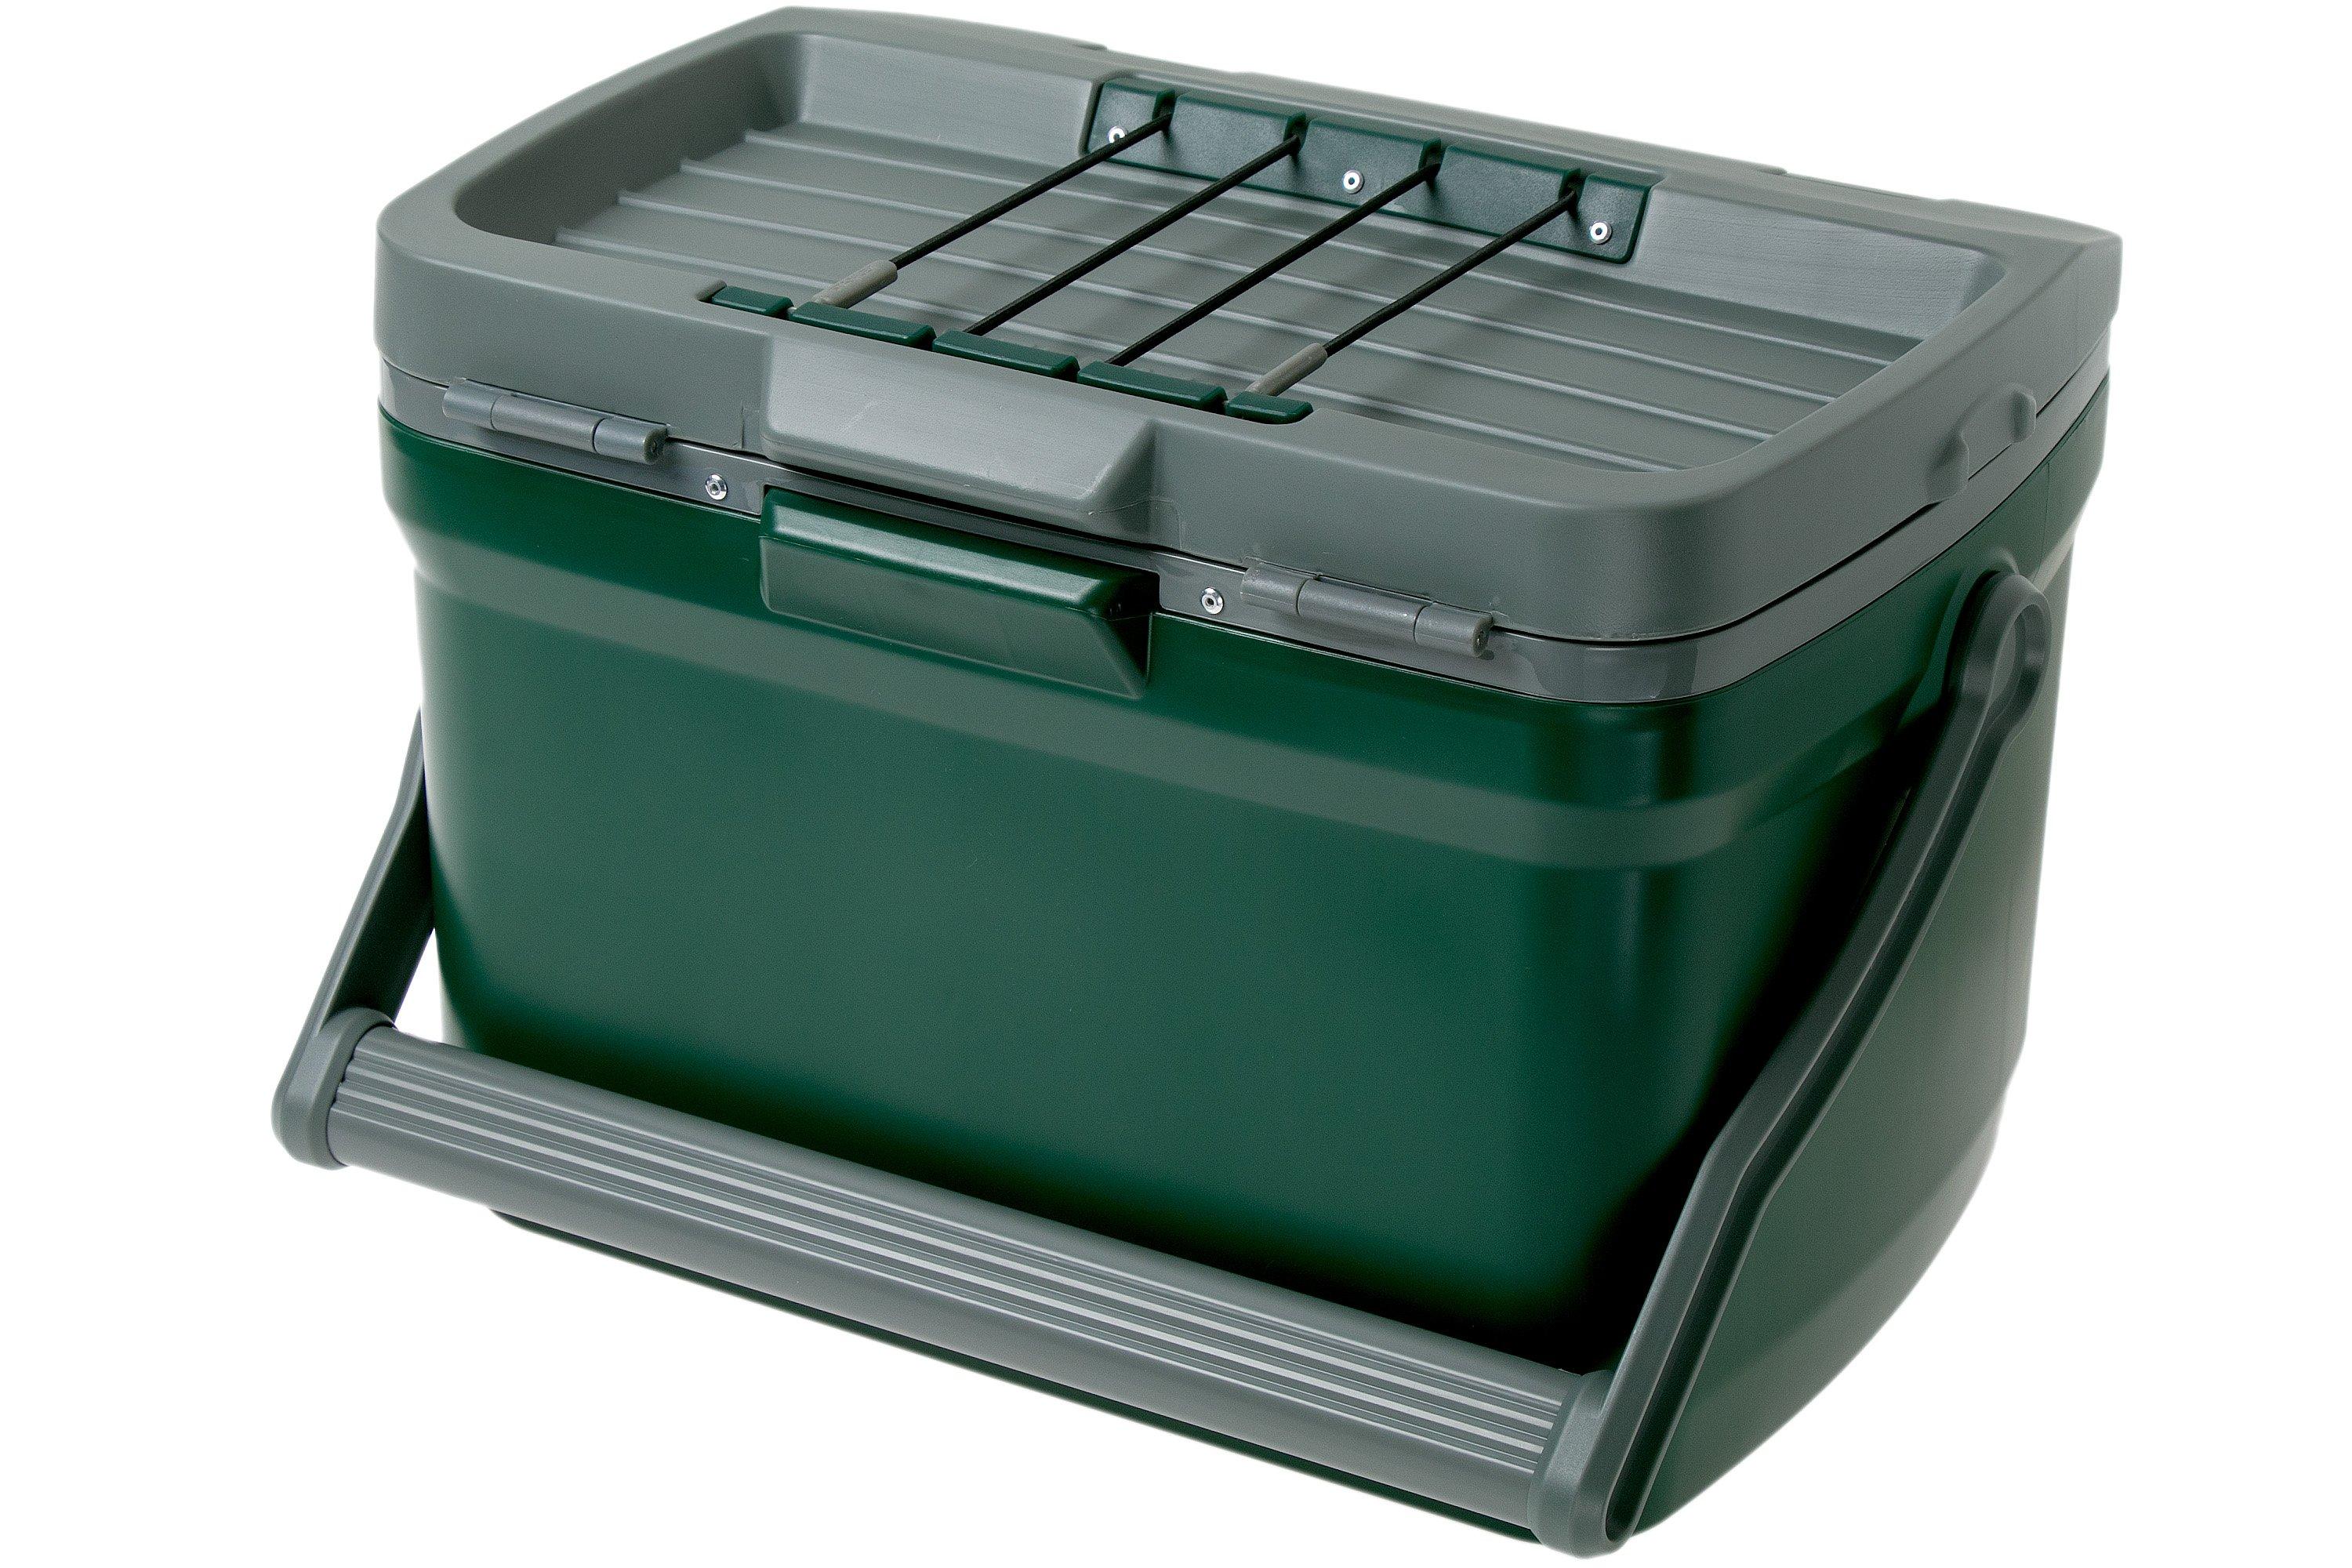 Stanley Green Adventure Easy-Carry Lunch Cooler, 16 qt Stanley